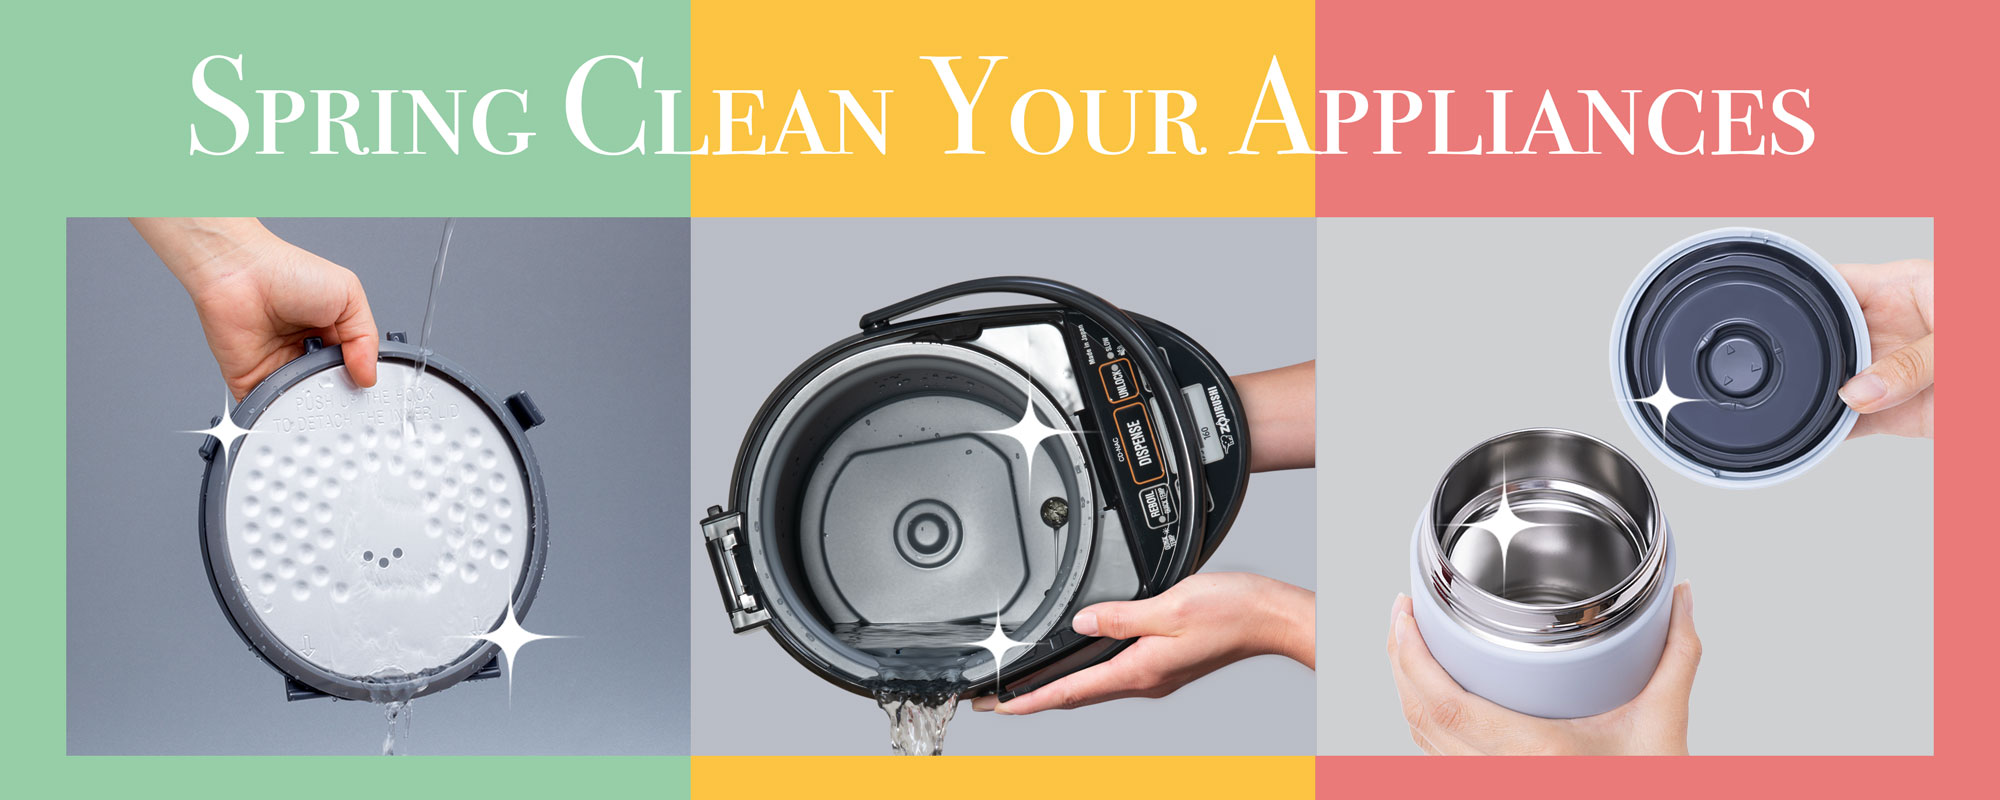 Spring Clean Your Appliances